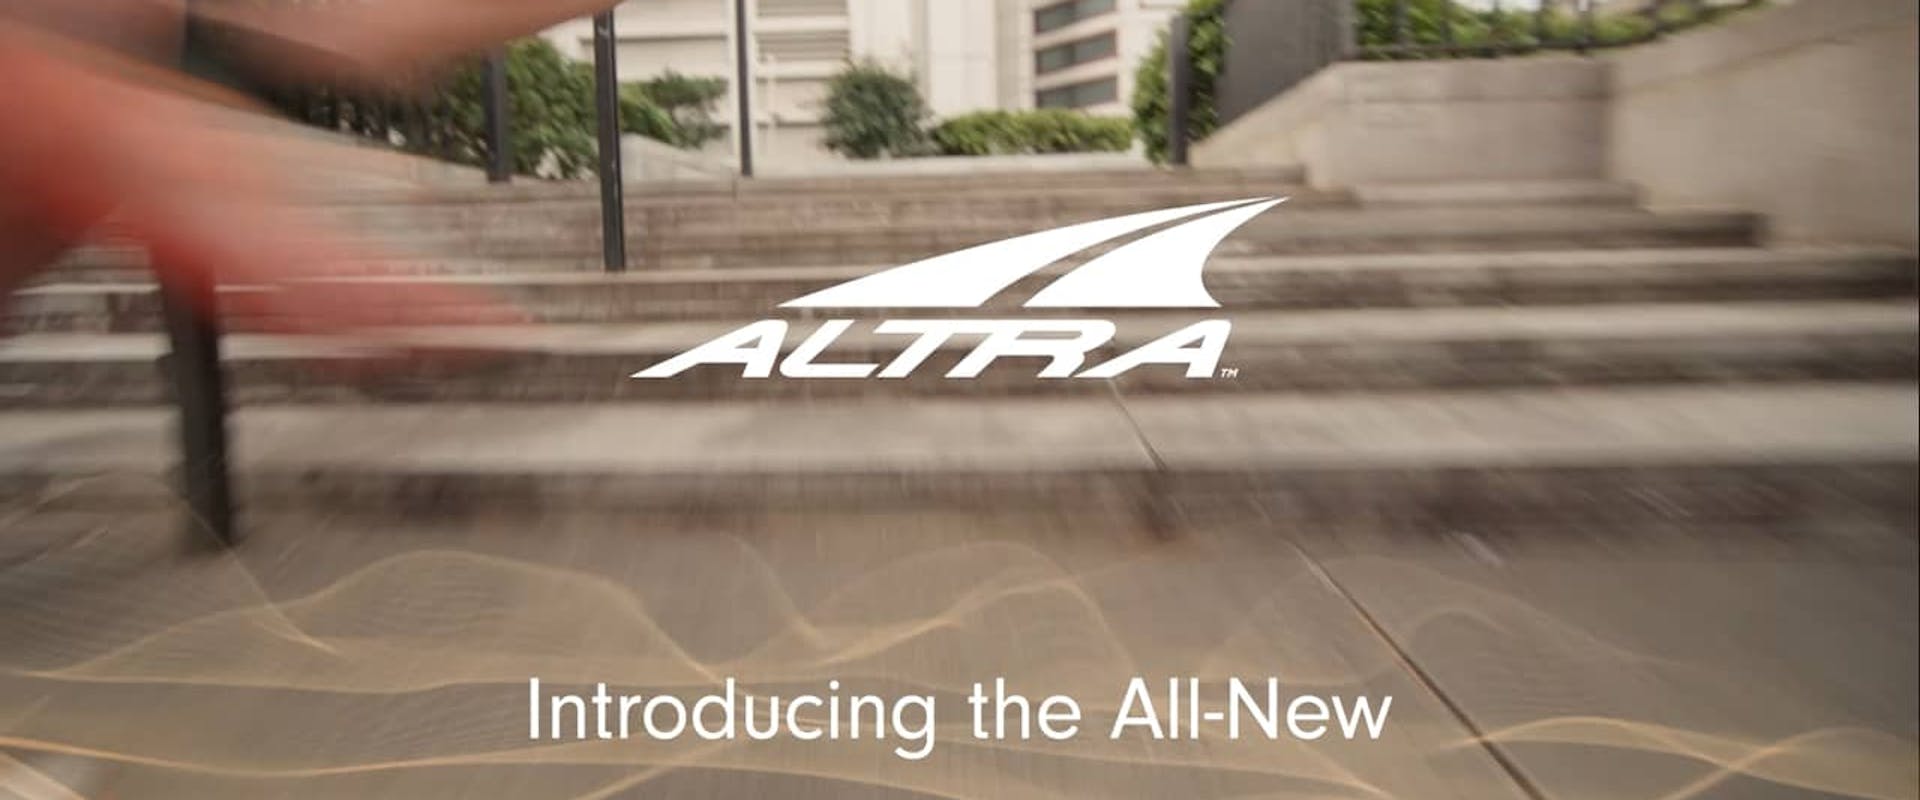 Altra FWD Experience